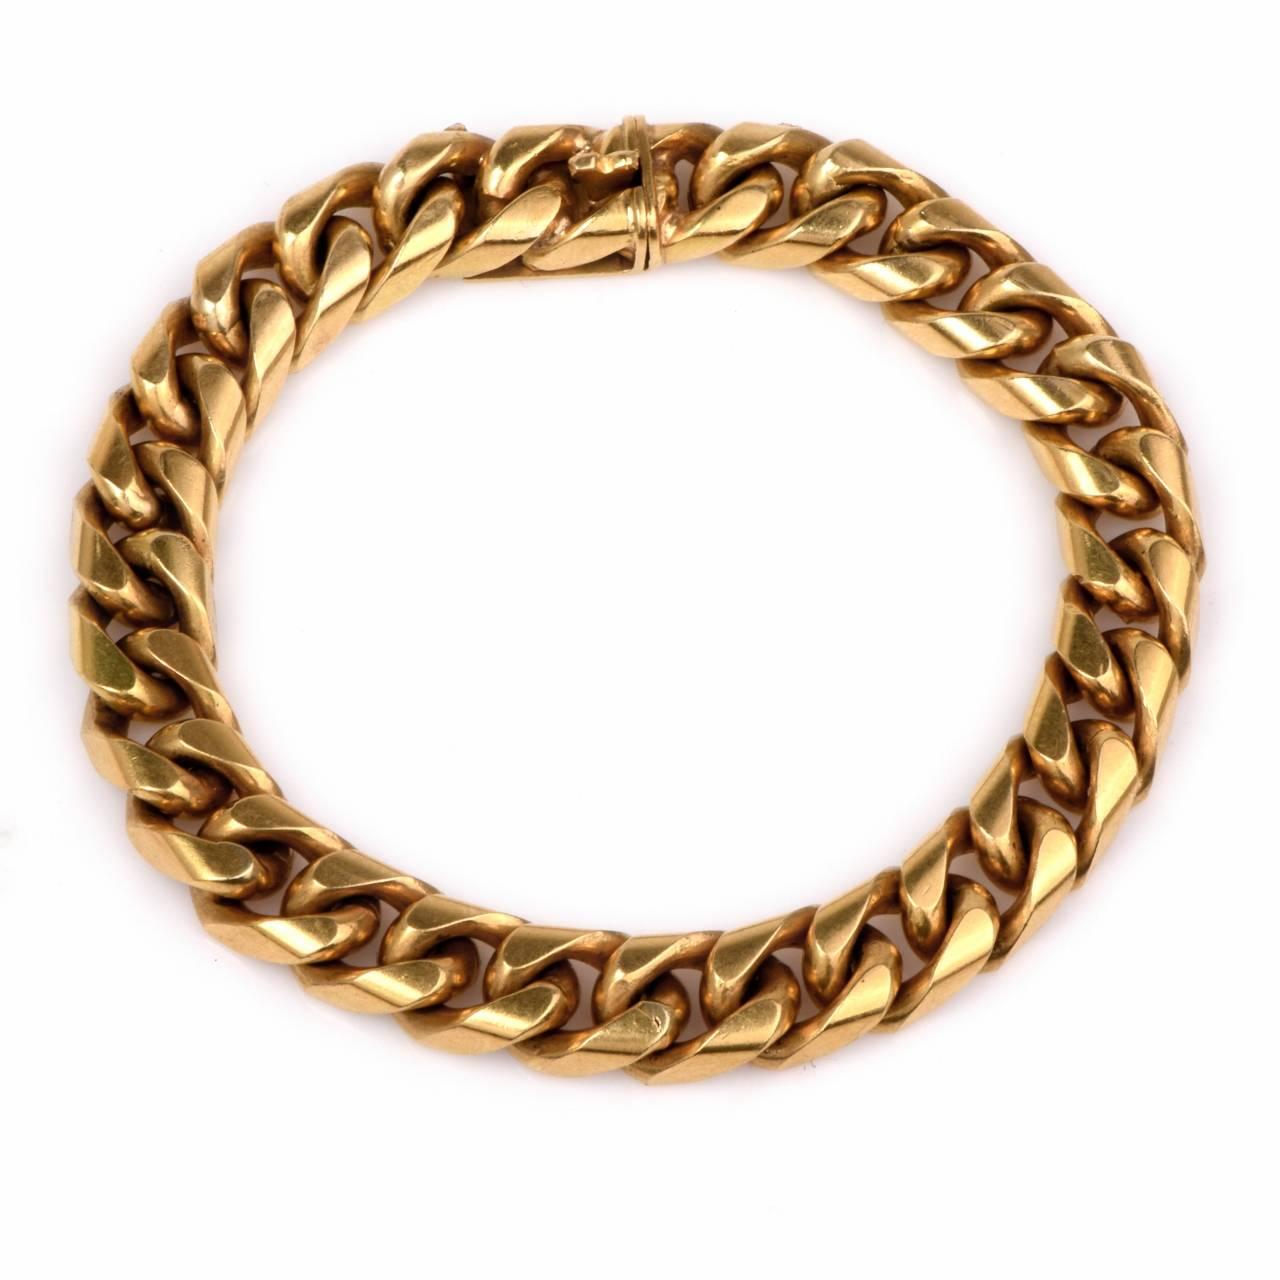 This bold  heavy Cuban link bracelet with classically is crafted in solid 18K yellow gold, weighing approx: 73.2 grams and measuring approx: 7.5